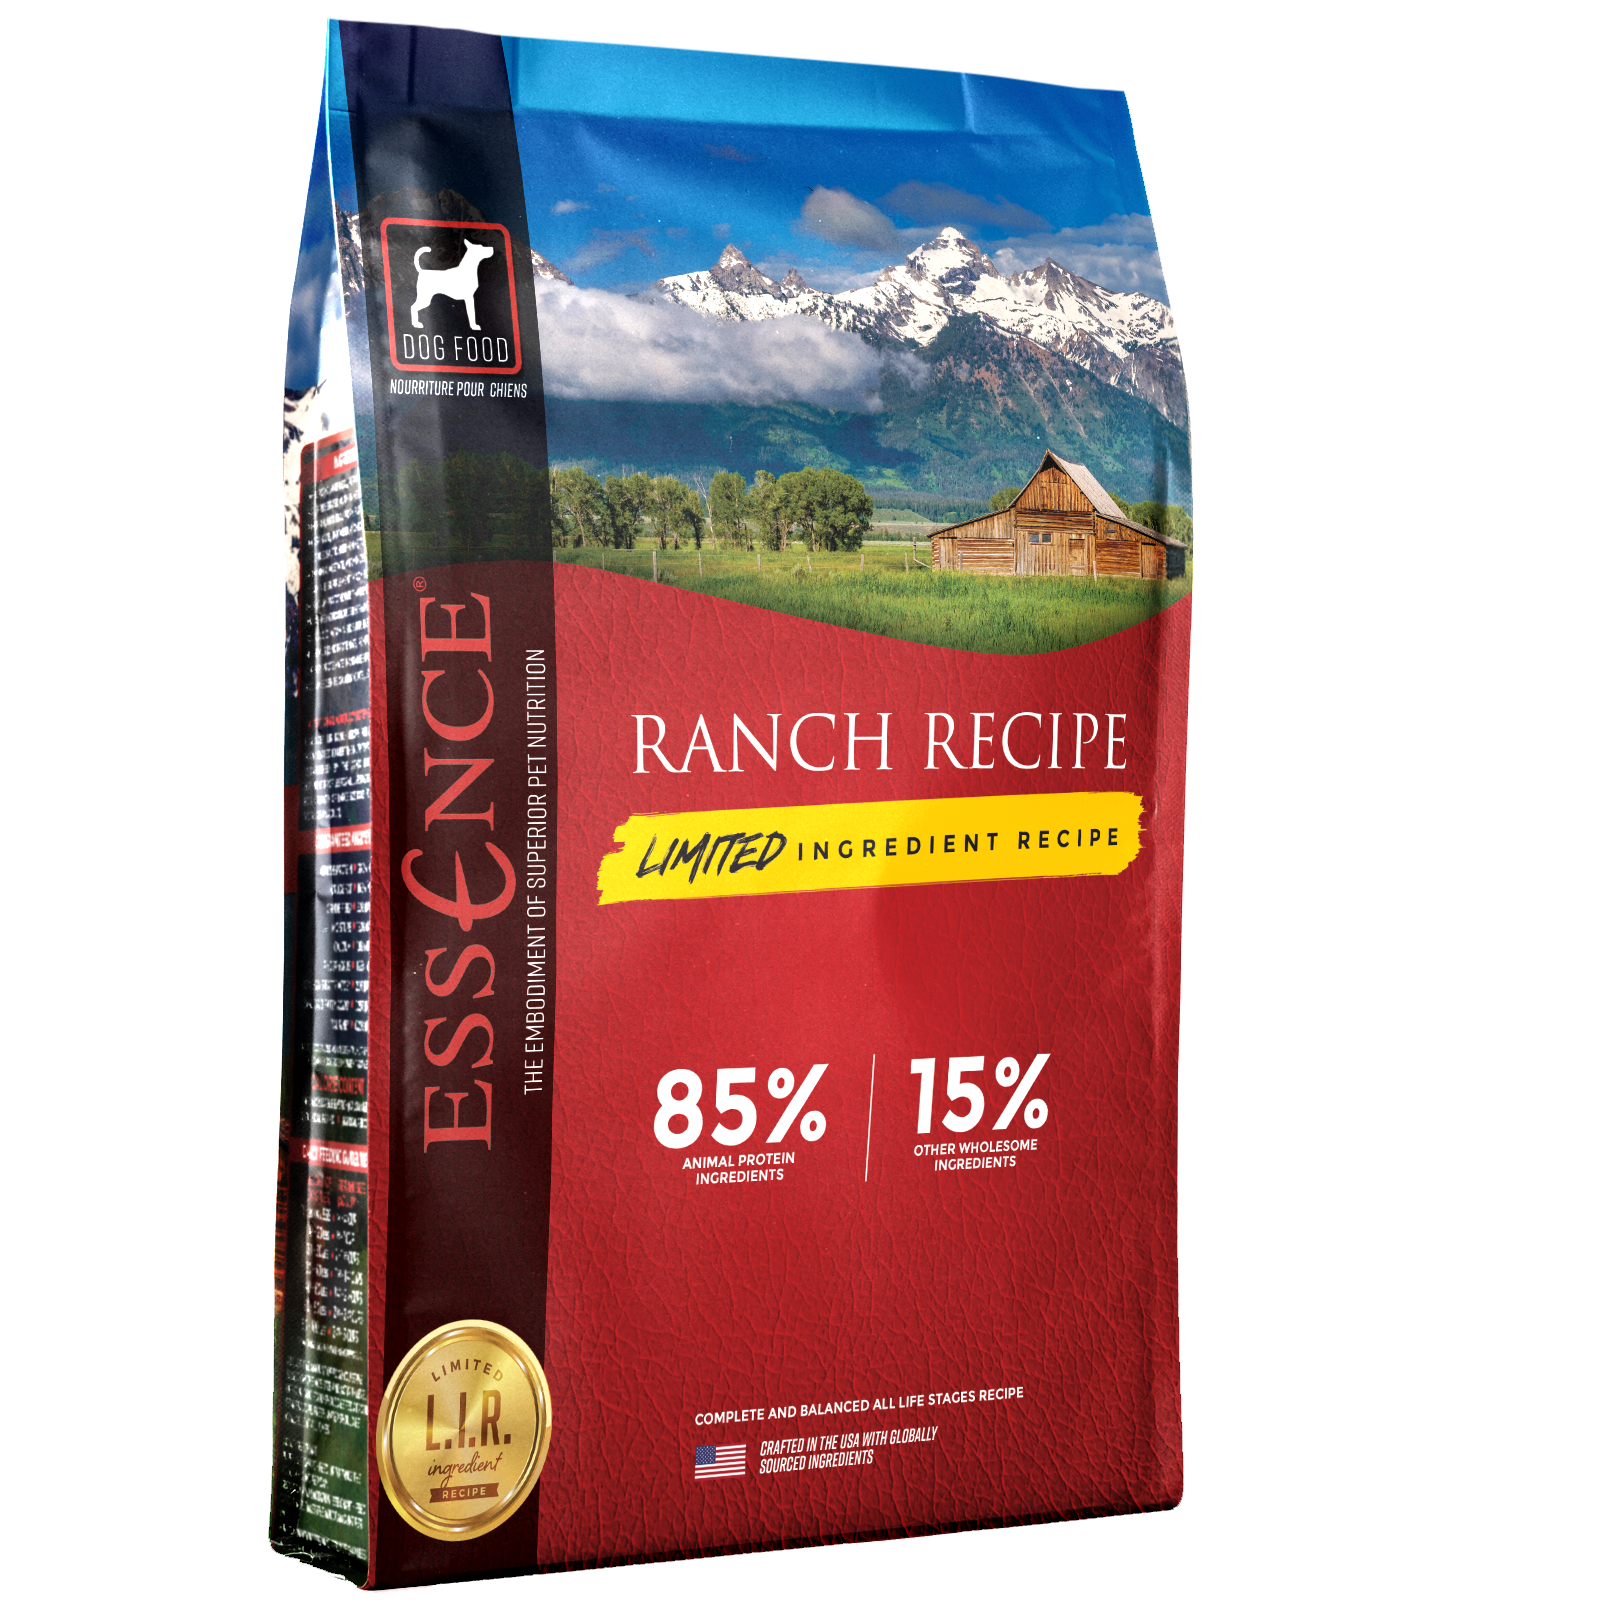 Essence Limited Ingredient Recipe Ranch